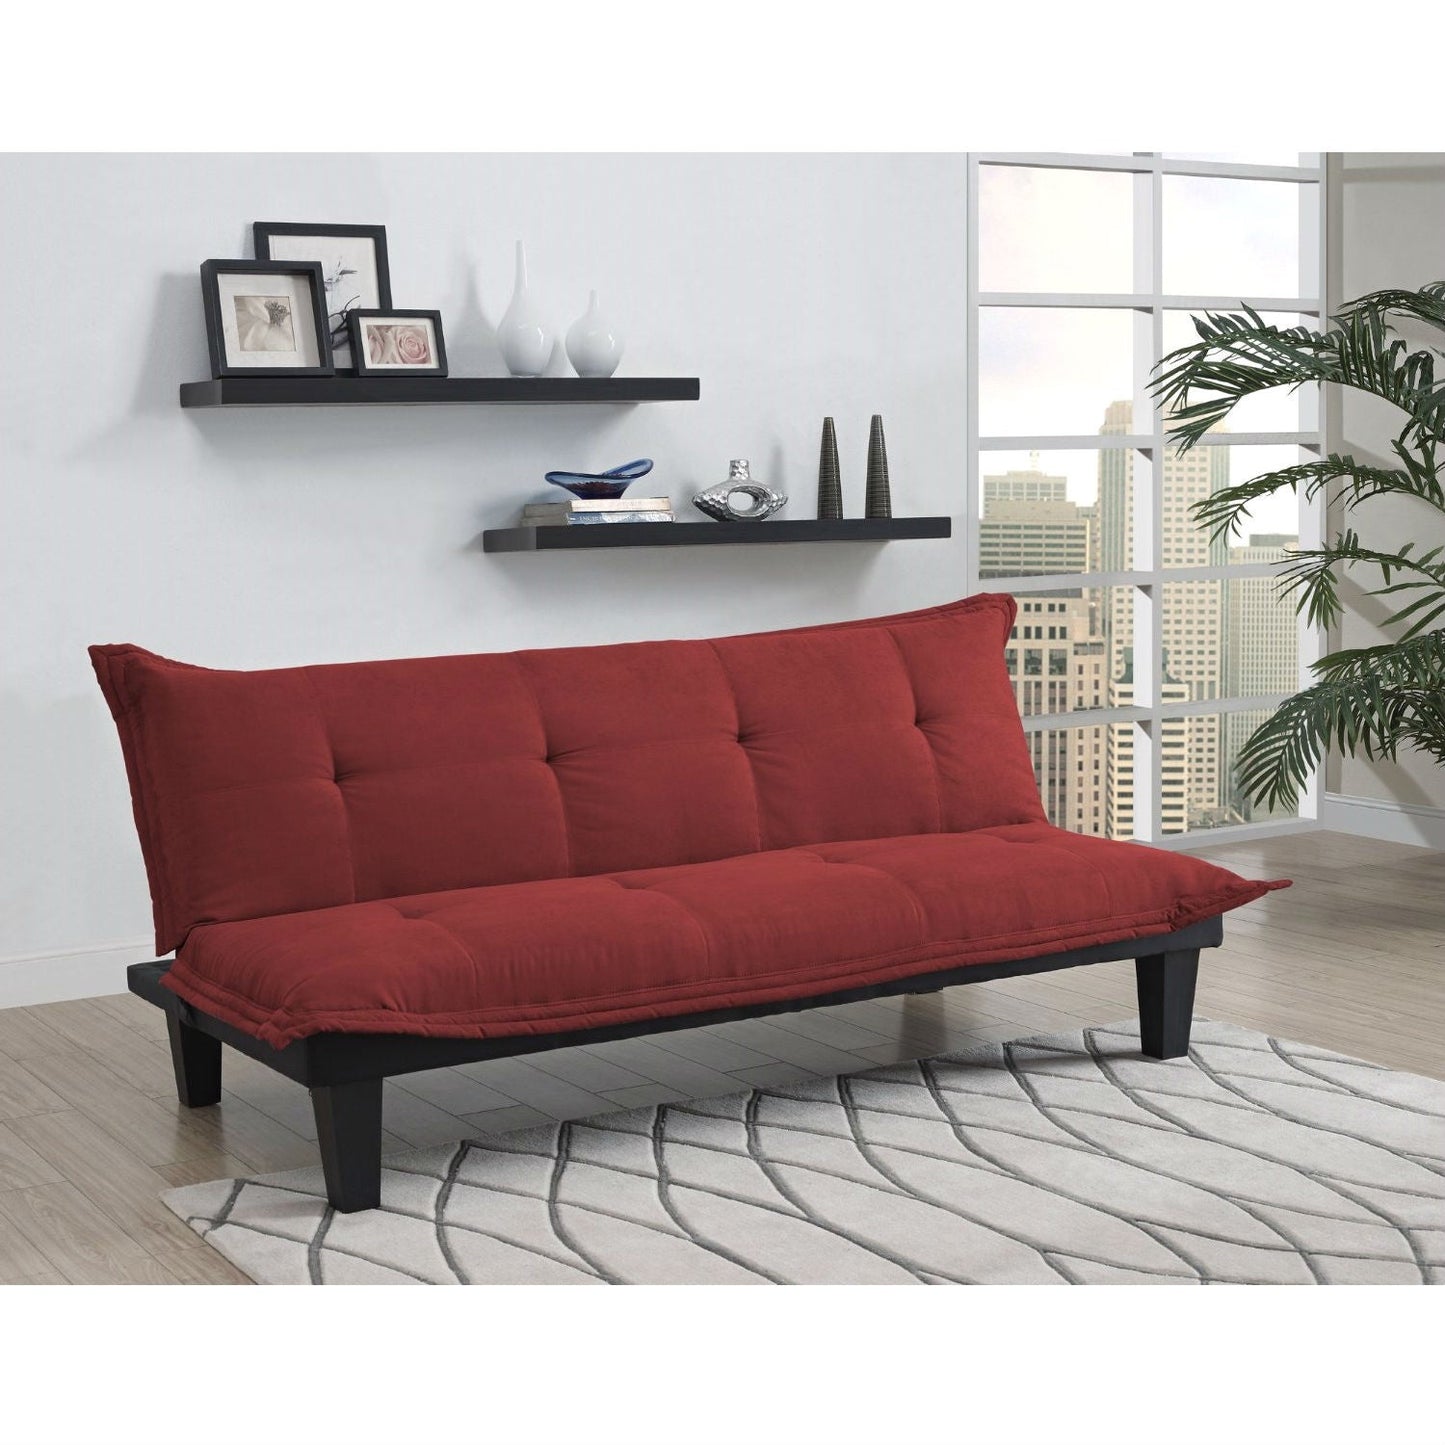 Living Room > Sofas - Contemporary Futon Style Sleeper Sofa Bed In Red Microfiber